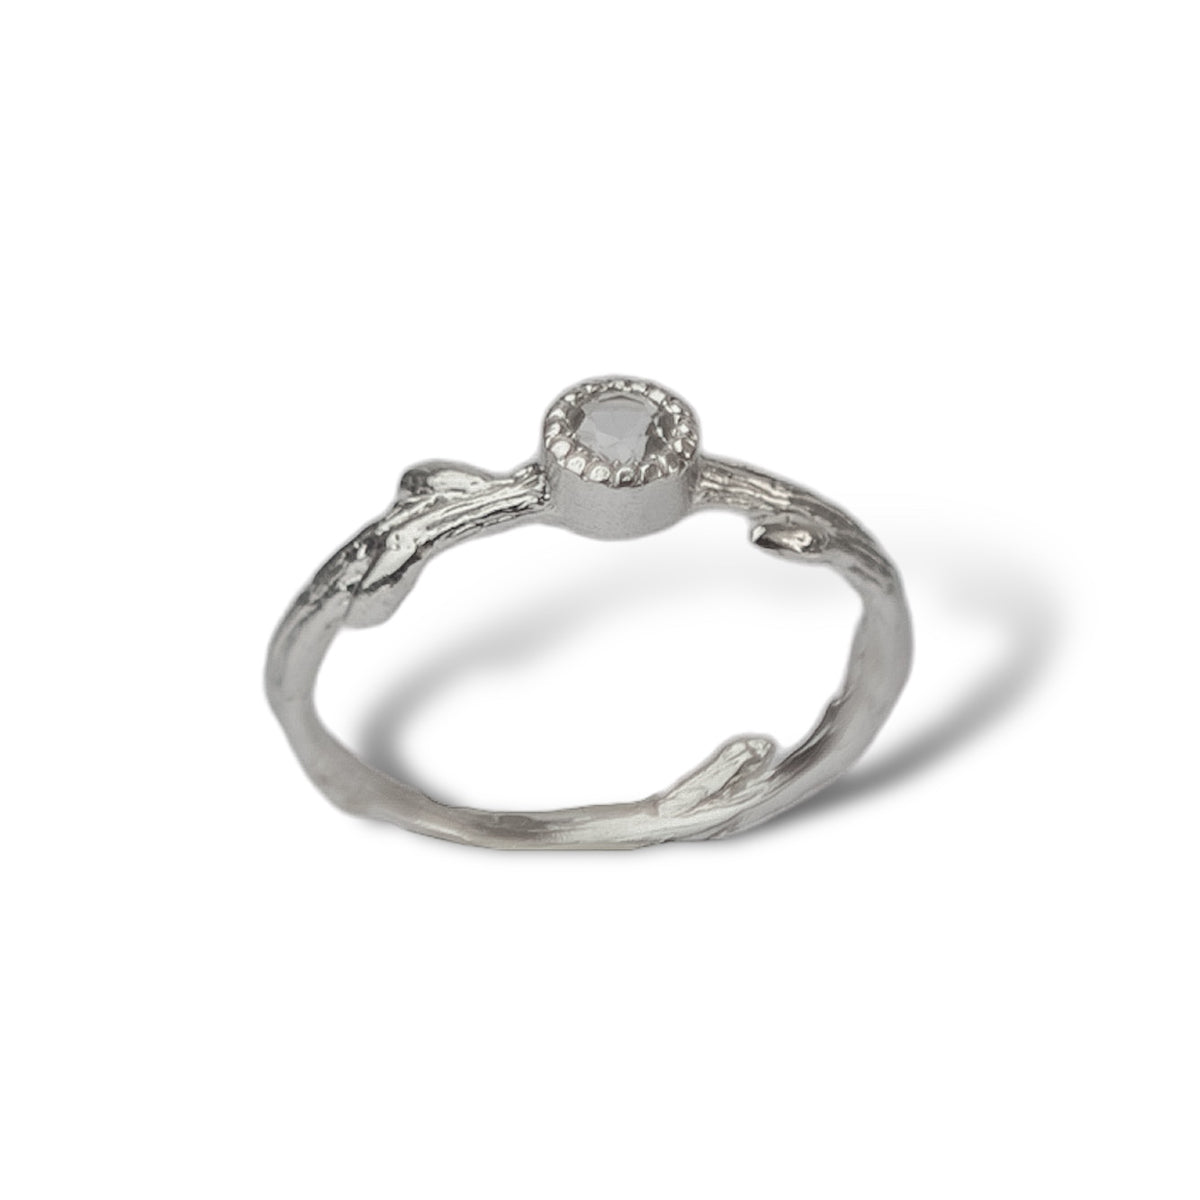 Branch-Ring with White Topaz Size 18.5